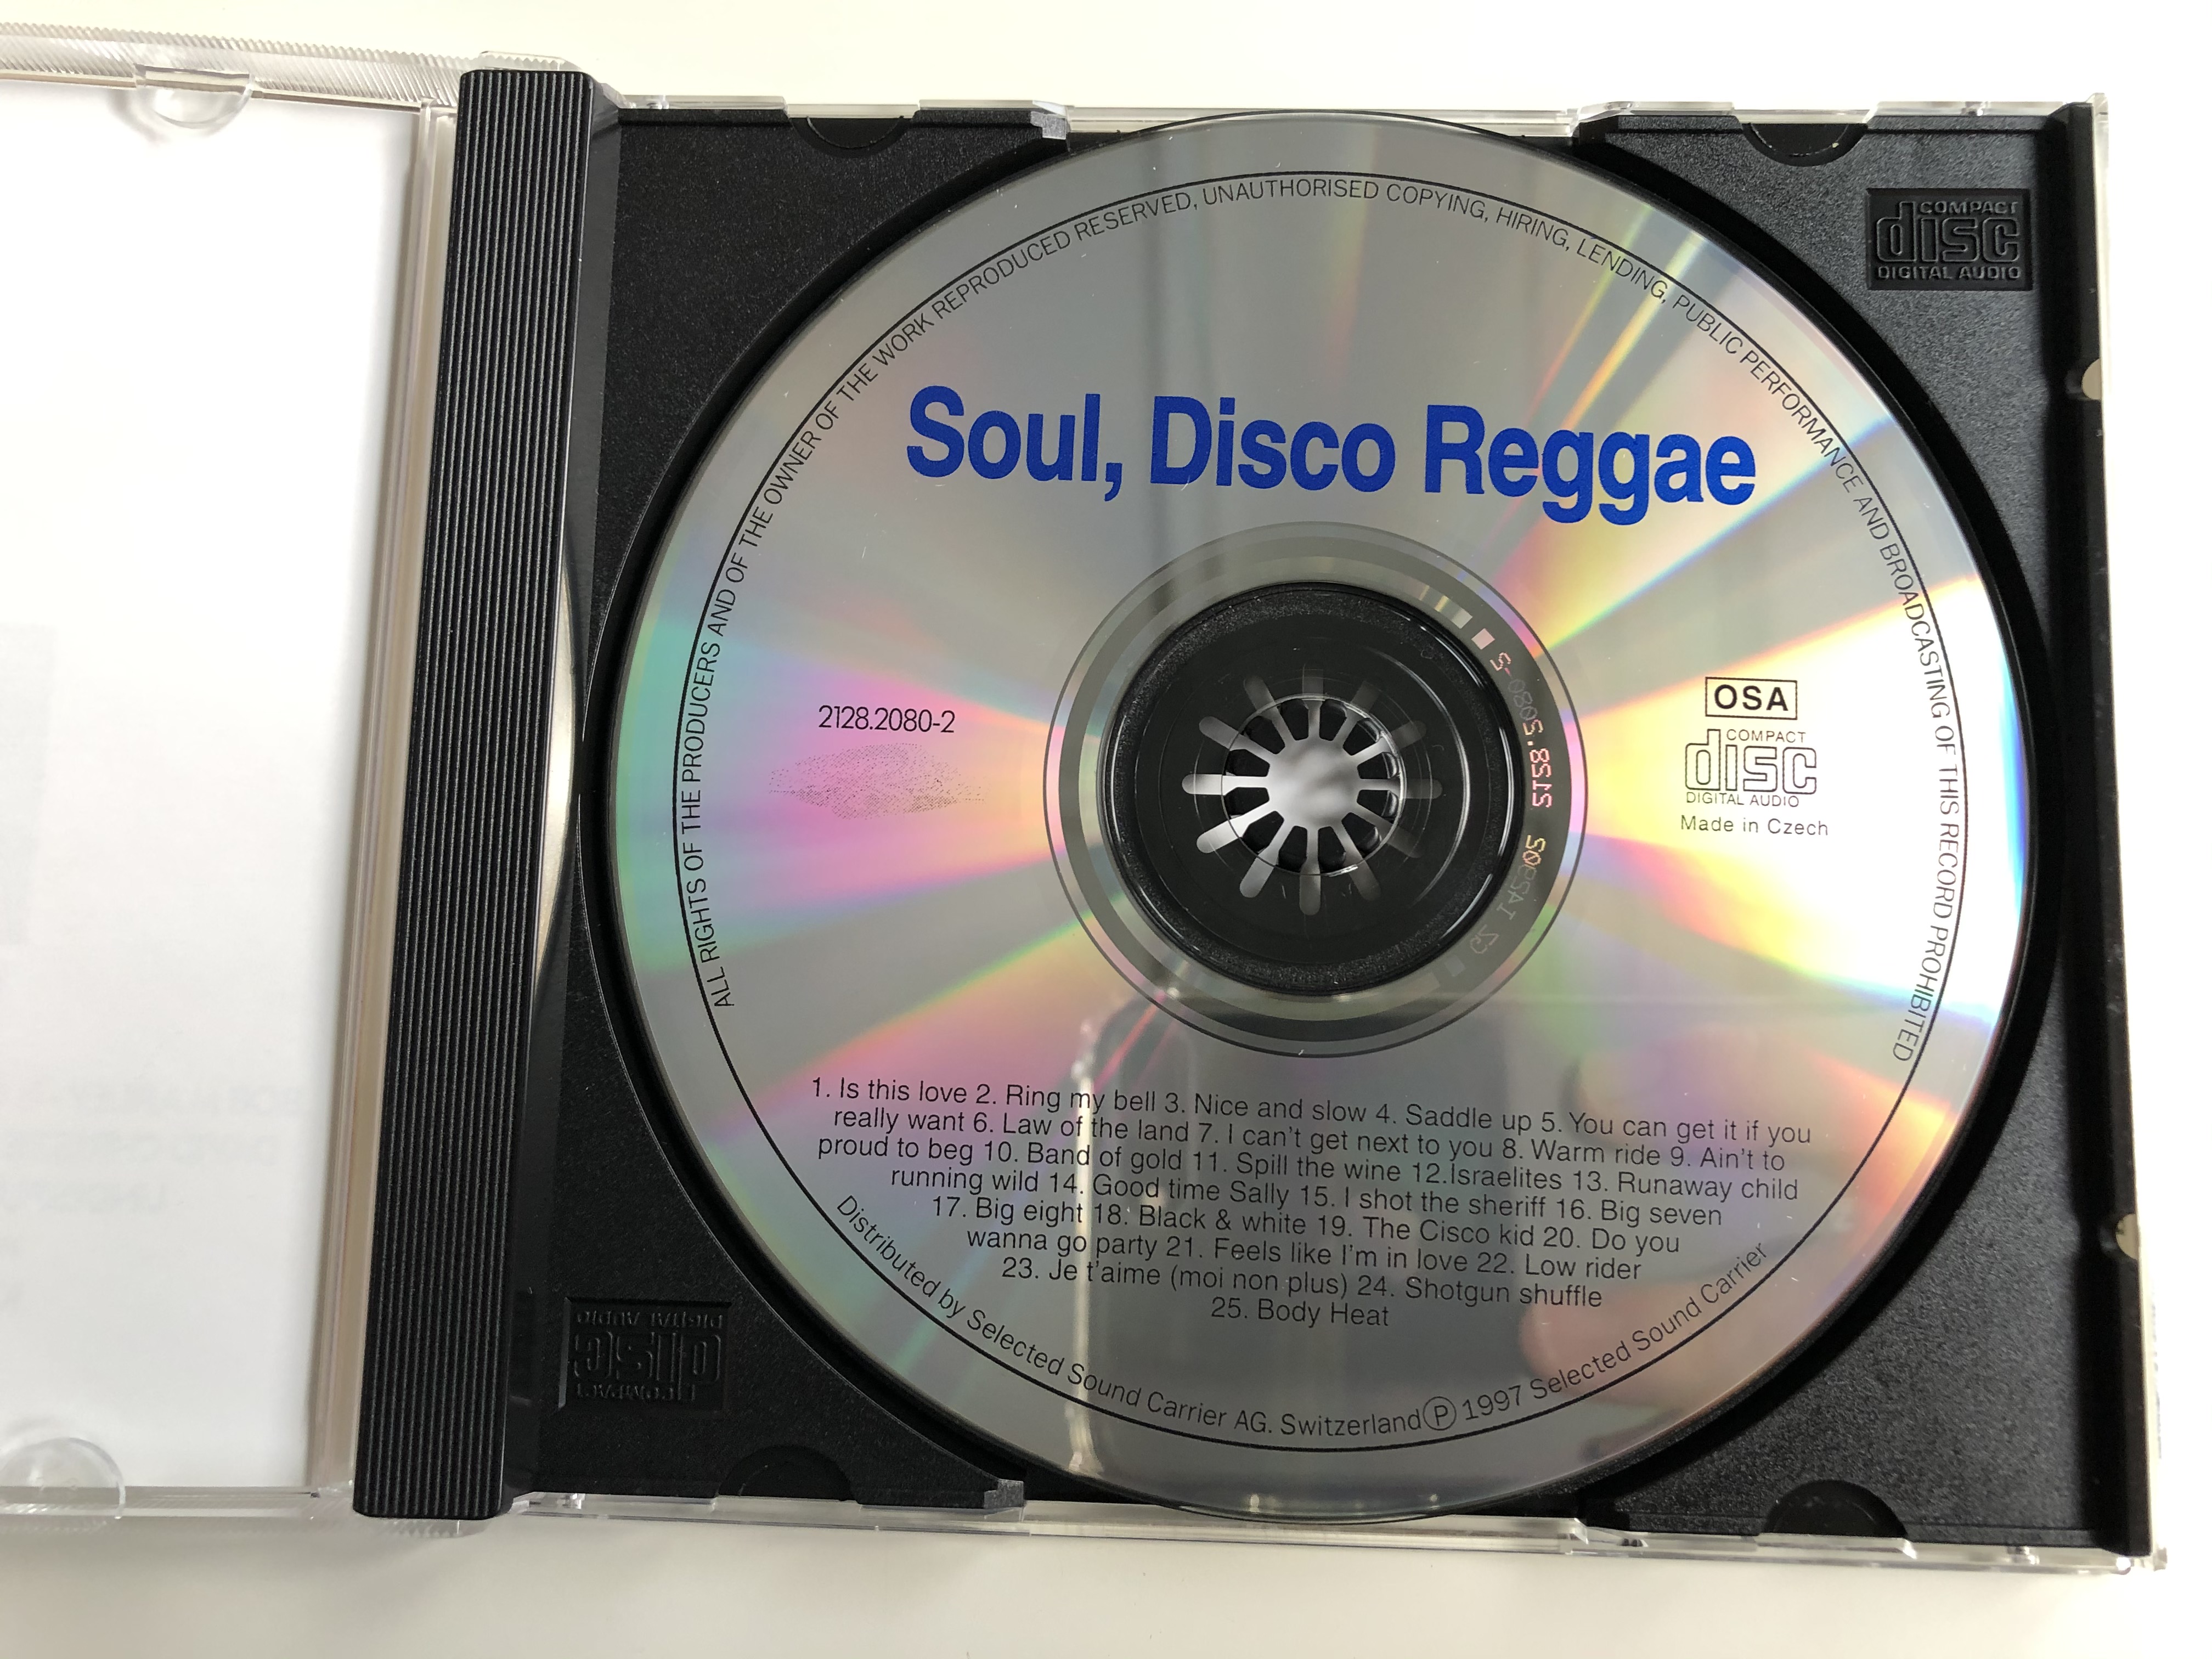 soul-disco-reggae-bob-marley-is-this-love-anita-ward-ring-my-bell-jesse-green-nice-and-slow-david-christie-saddle-up-desmond-dekker-you-can-get-it-if-you-really-want-selected-.jpg